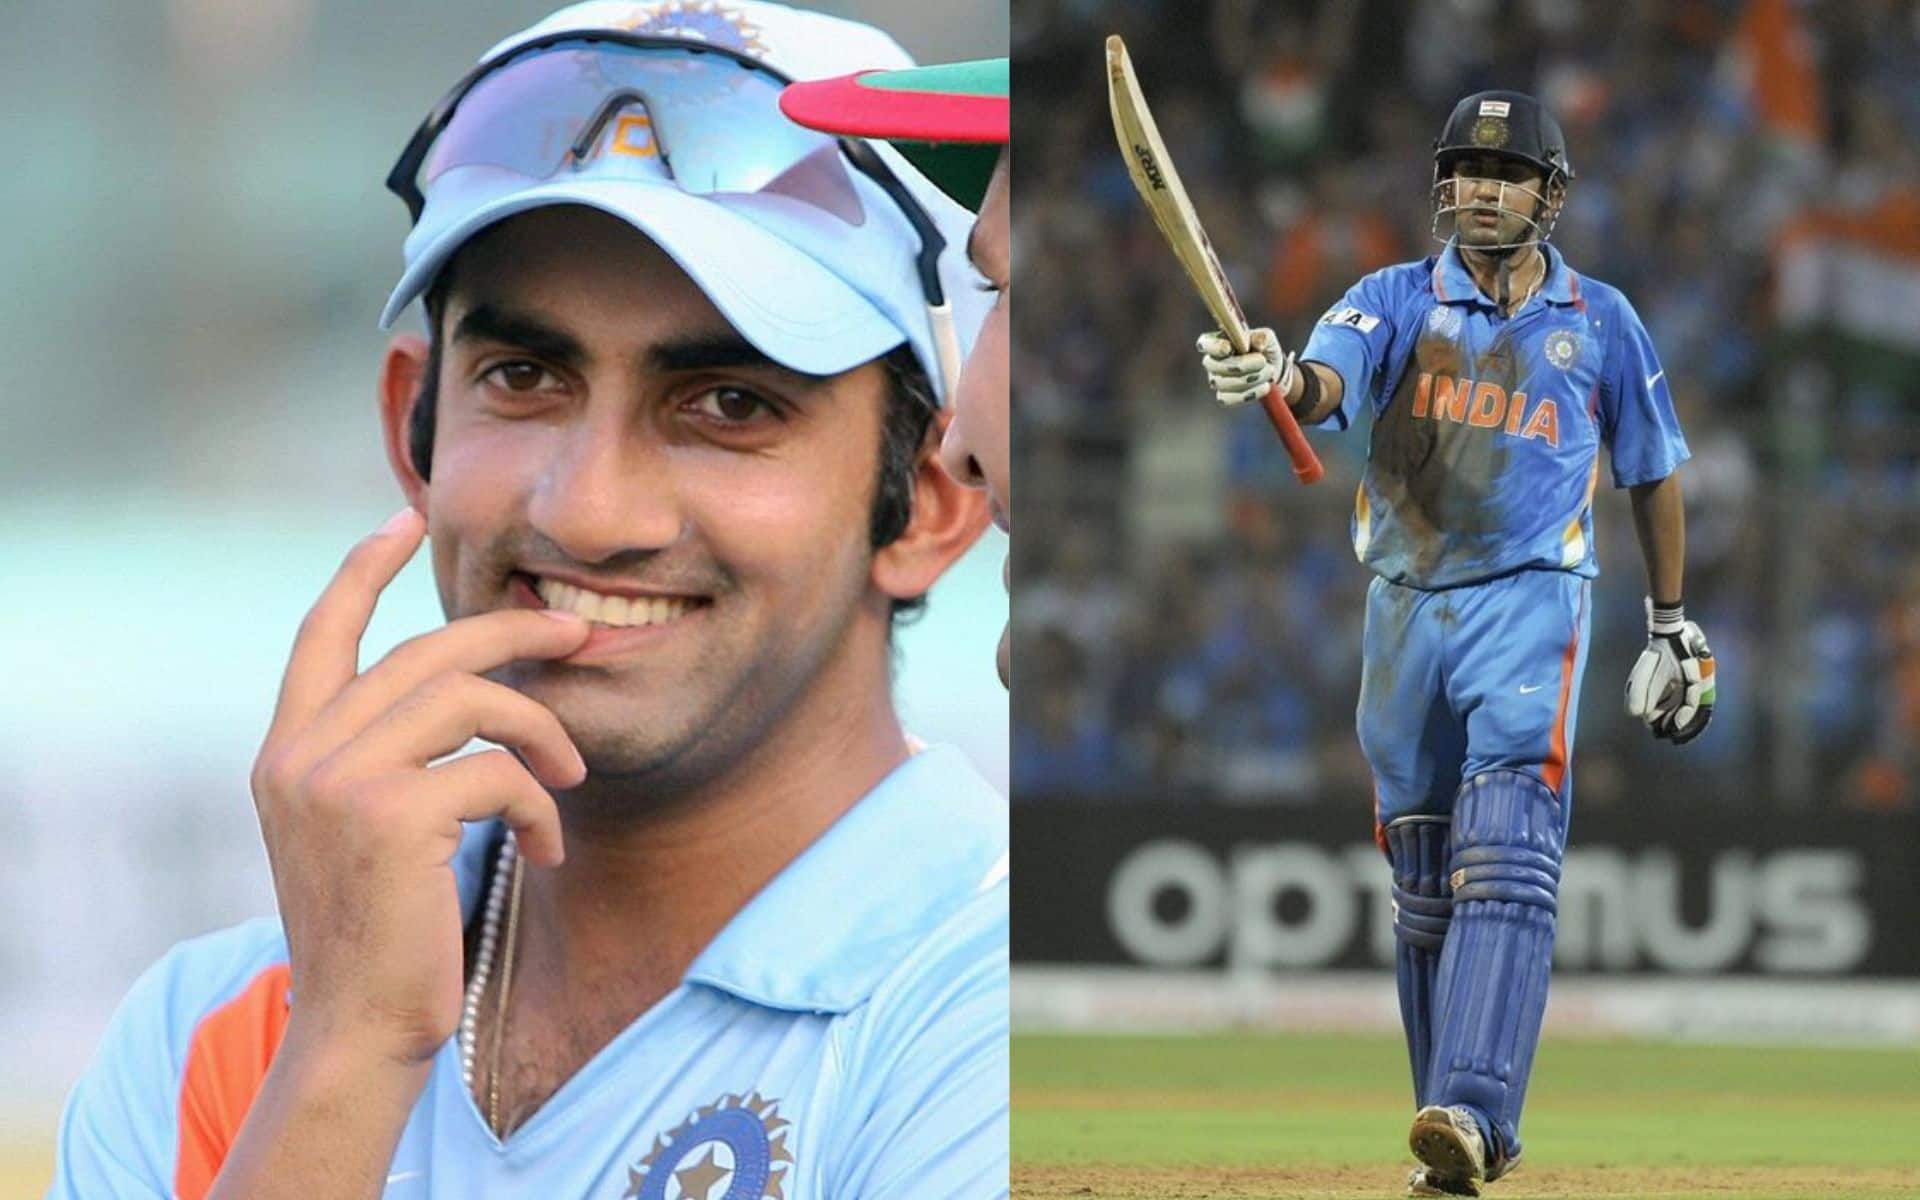 The idea of Gautam Gambhir returning to the blues in this unique avatar has everyone on the edge of their seats (X.com)
